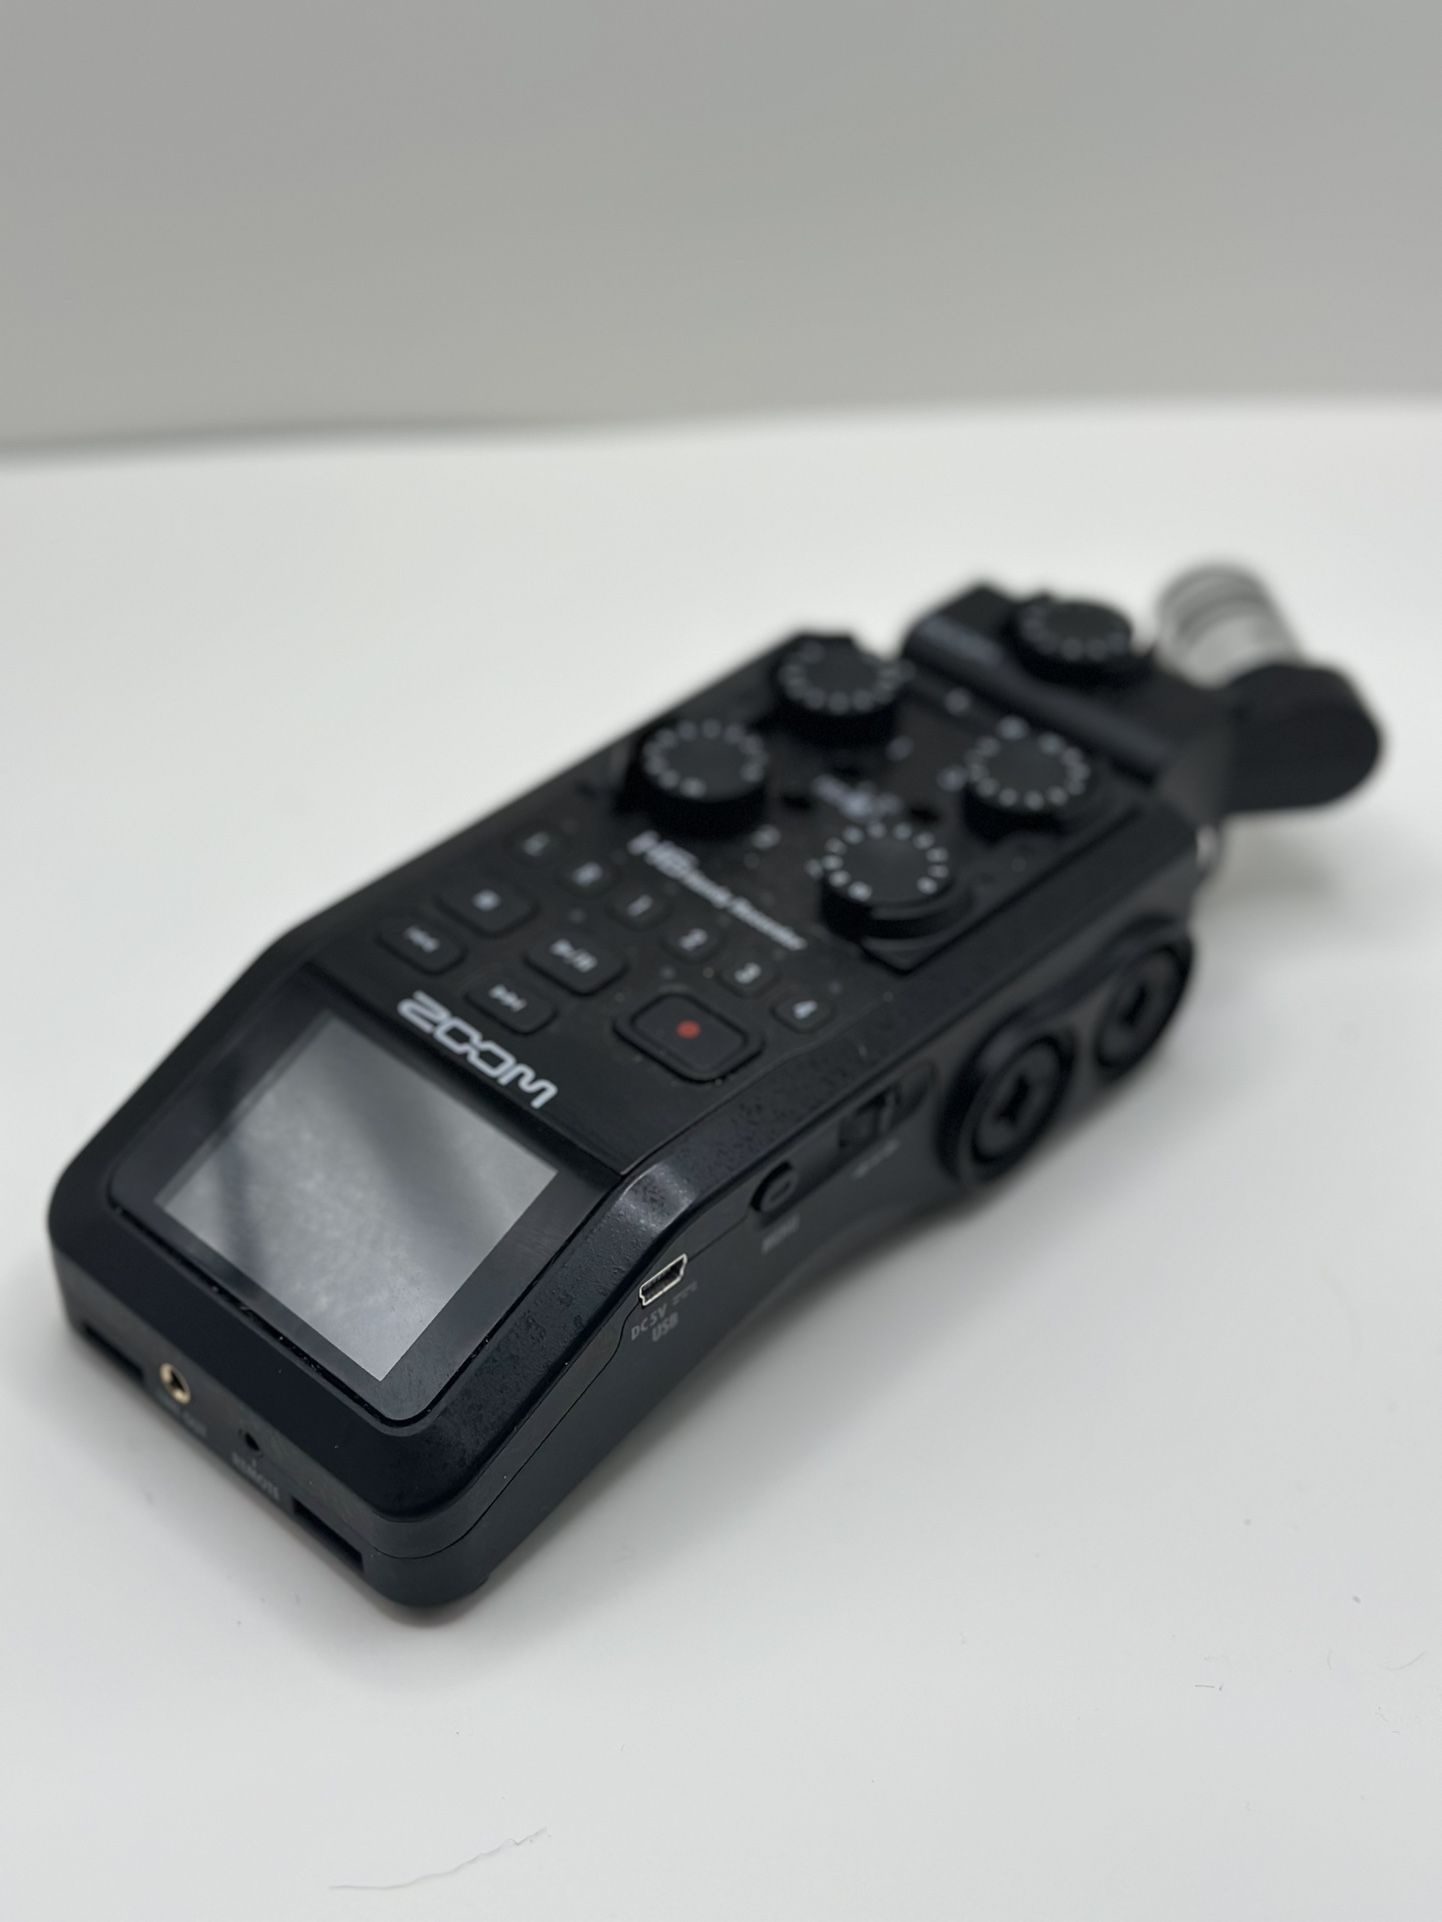 Zoom H6 All Black 6-Track Portable Recorder, Stereo Microphones, 4 XLR/TRS Inputs, Records to SD Card, USB Audio Interface, Battery Powered, Podcastin